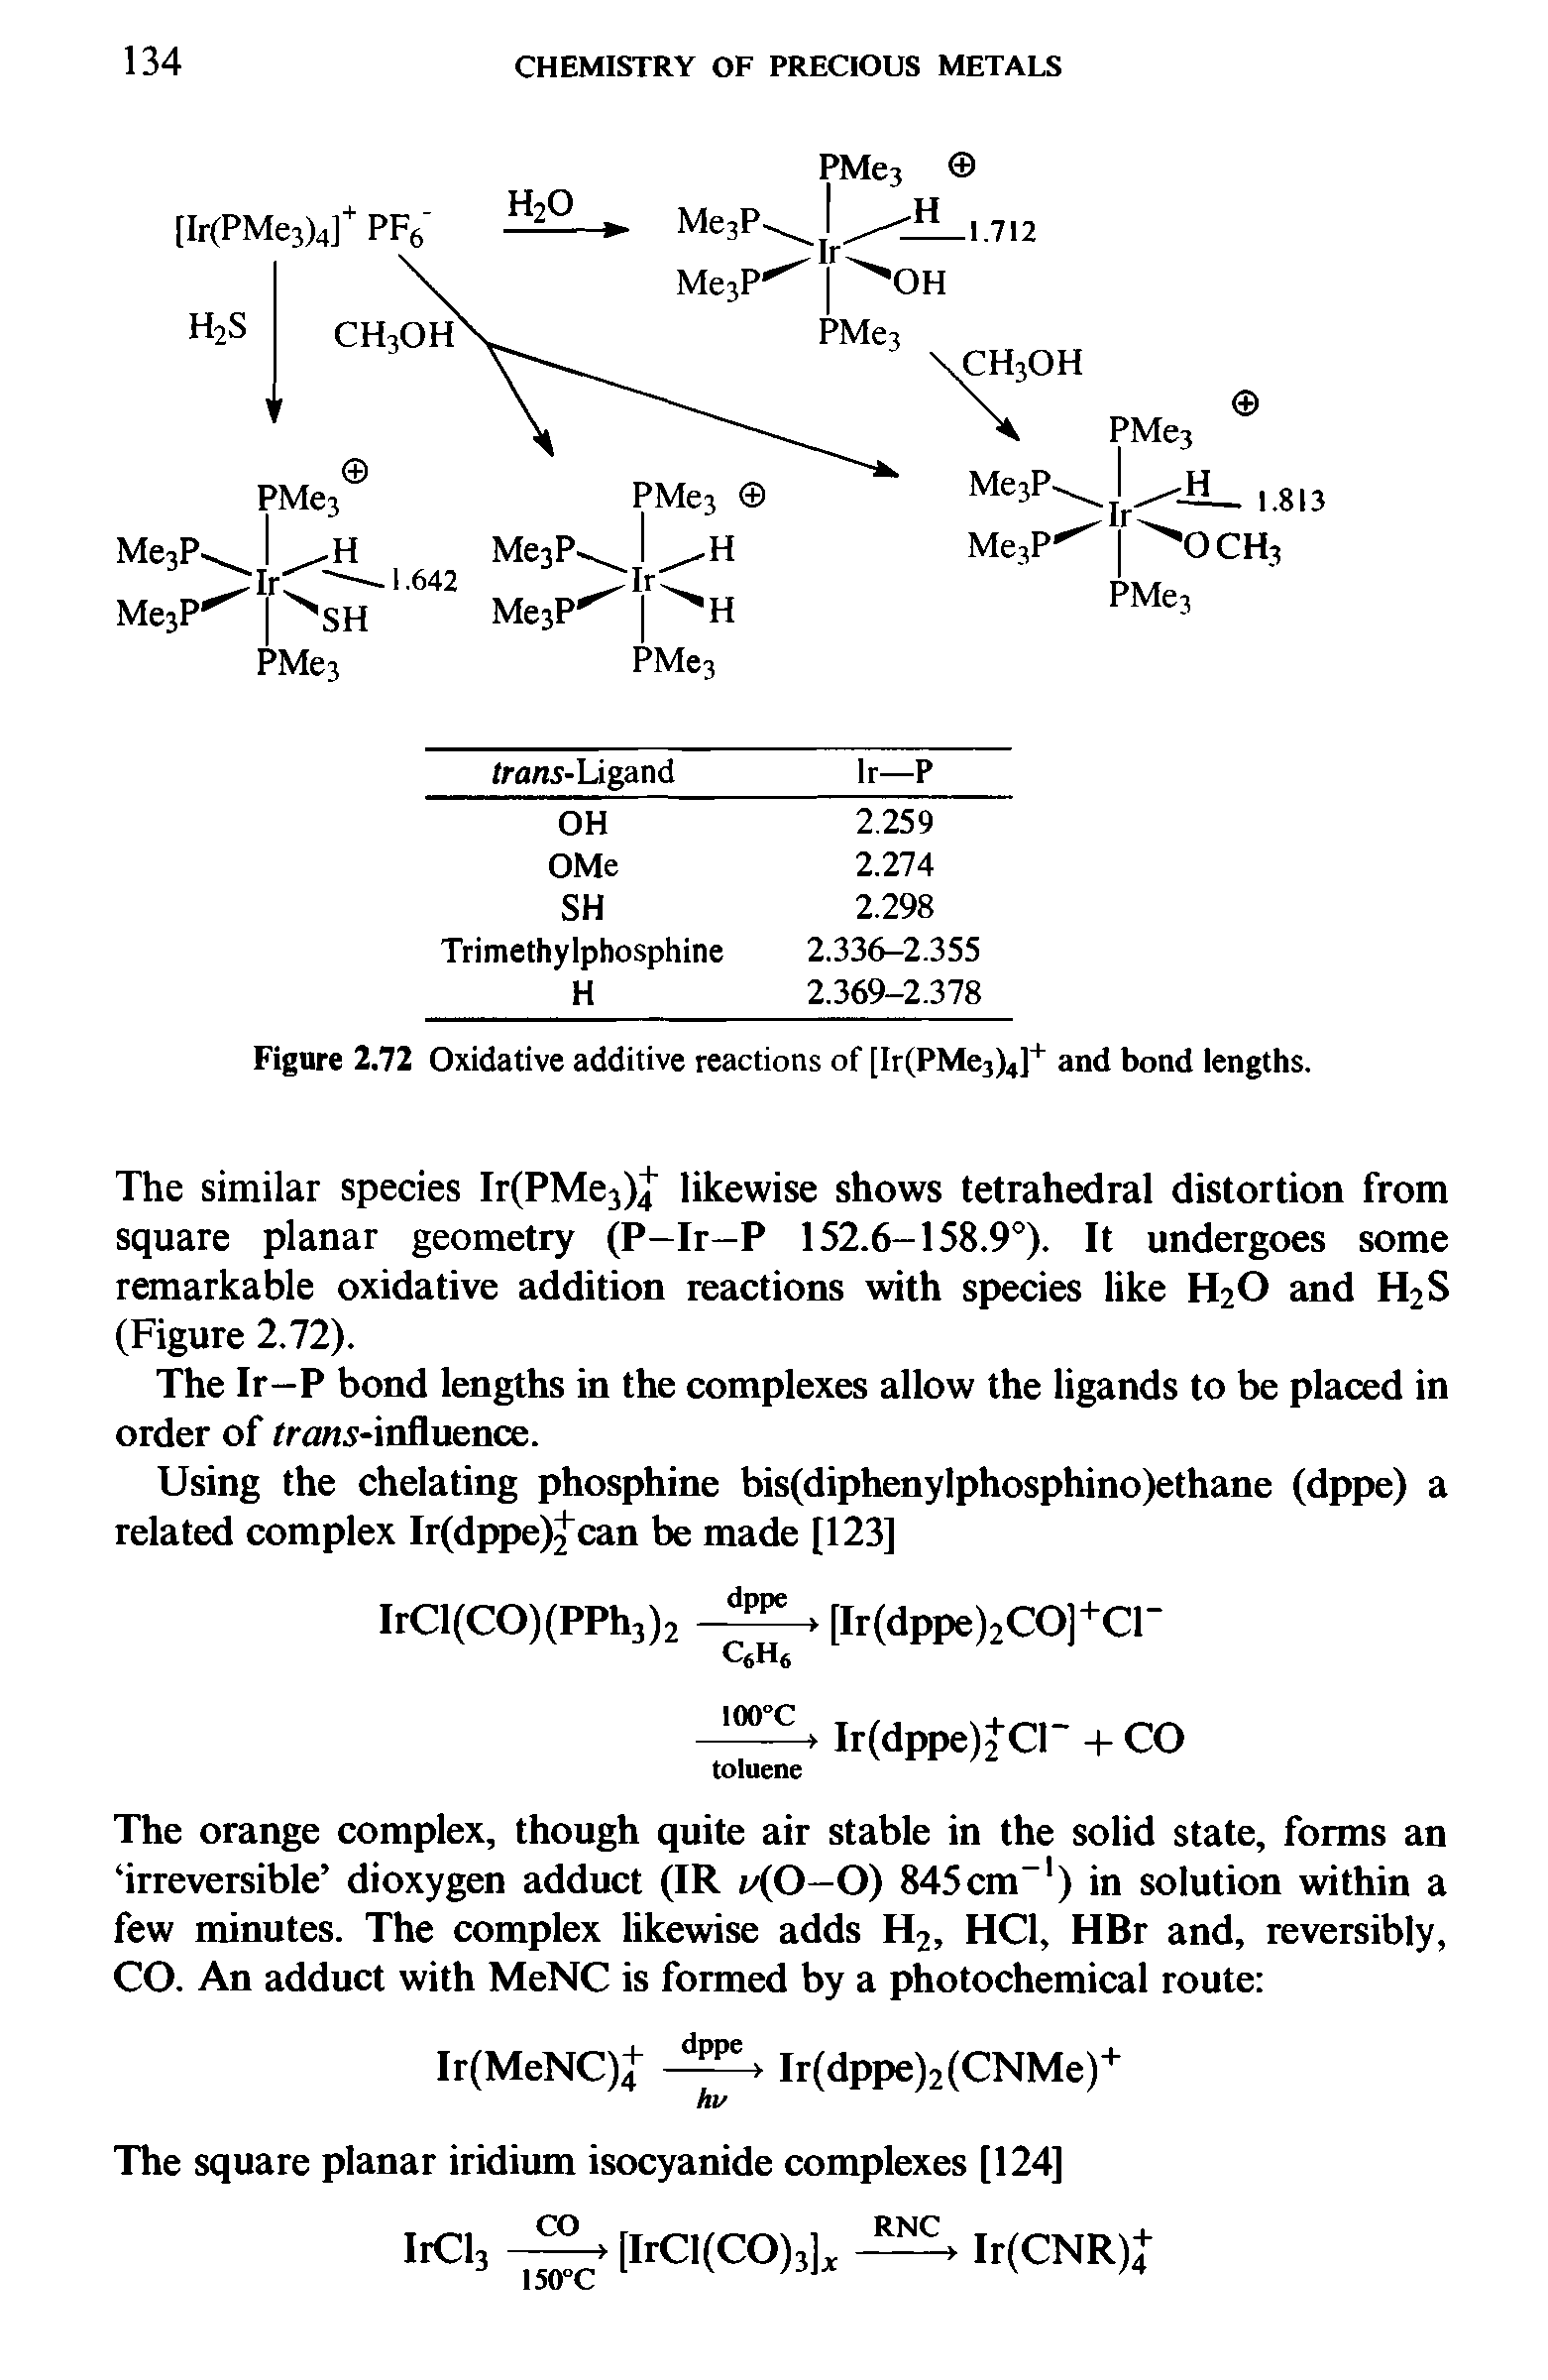 Figure 2.72 Oxidative additive reactions of [Ir(PMe3)4]+ and bond lengths.